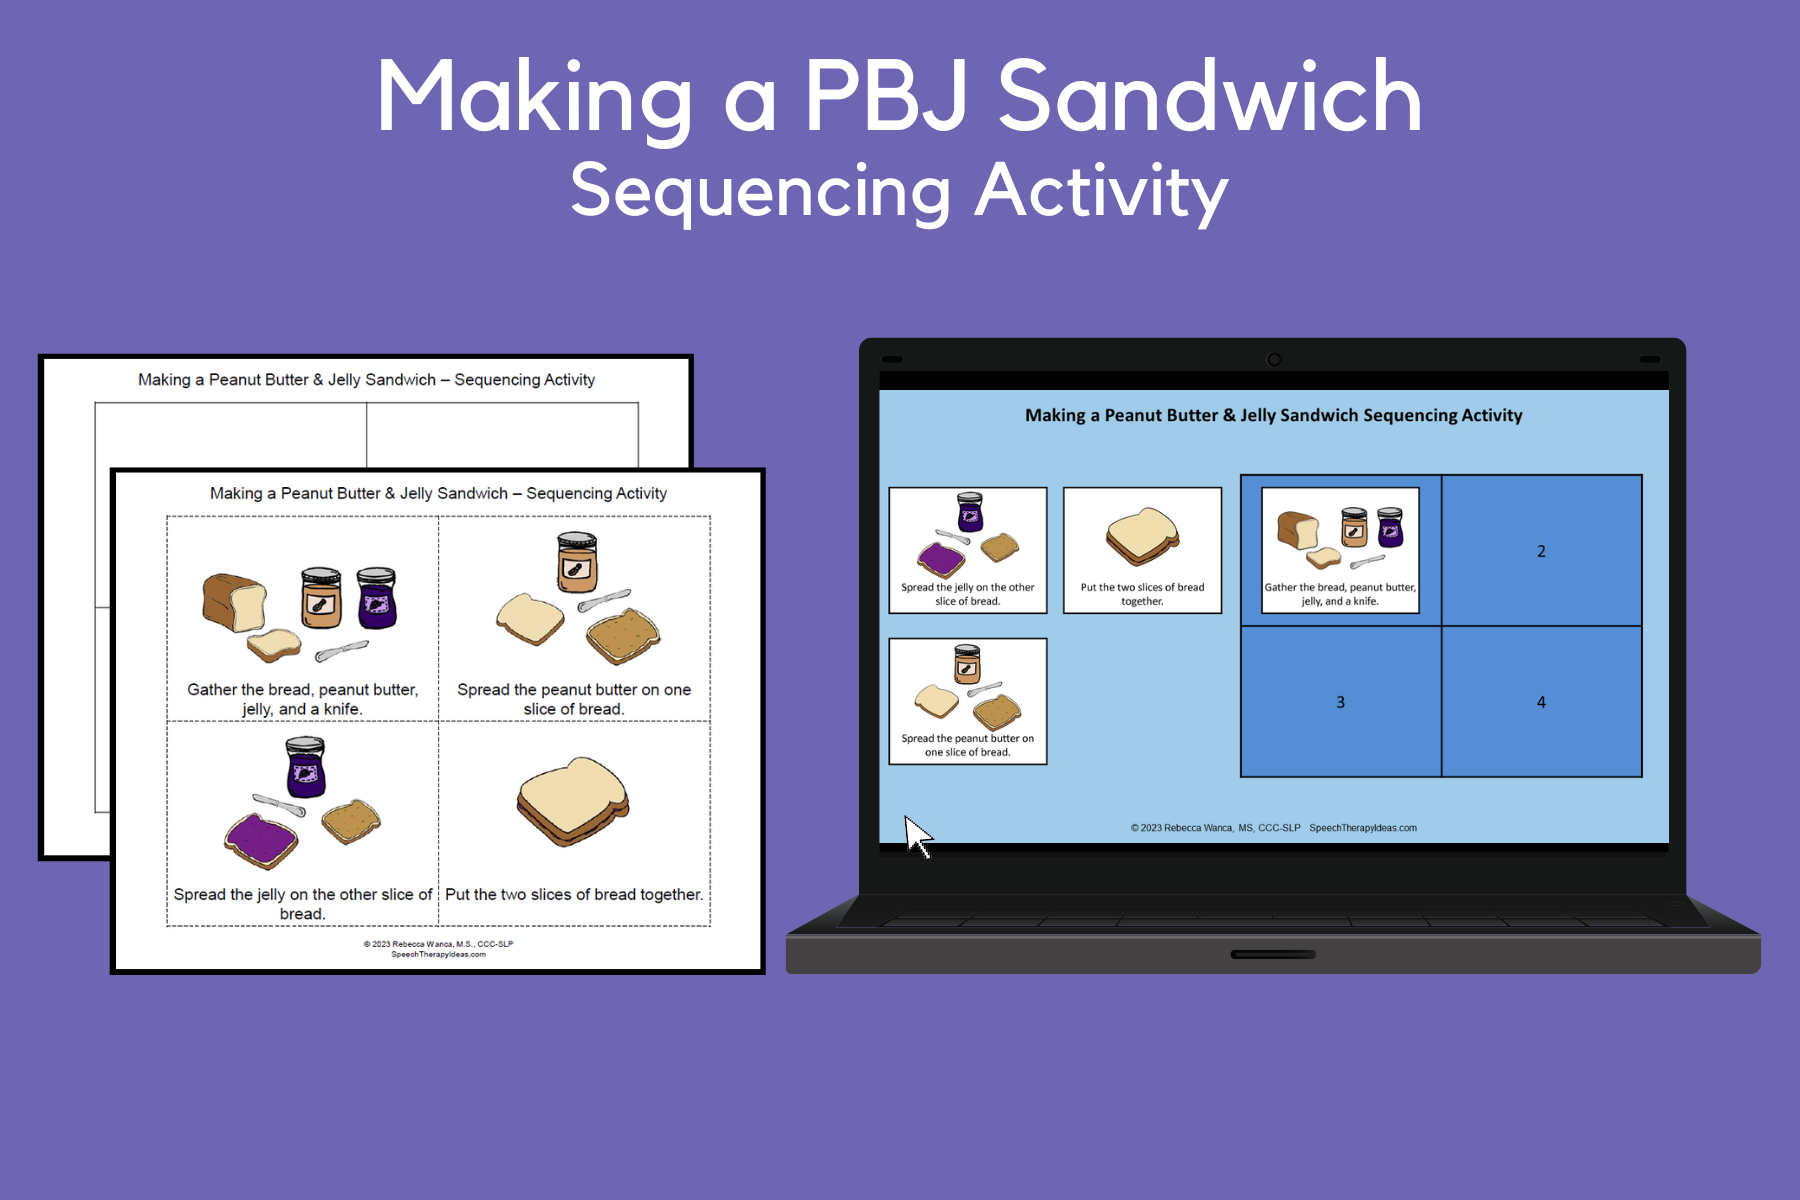 Making a Peanut Butter and Jelly Sandwich Sequencing Activity